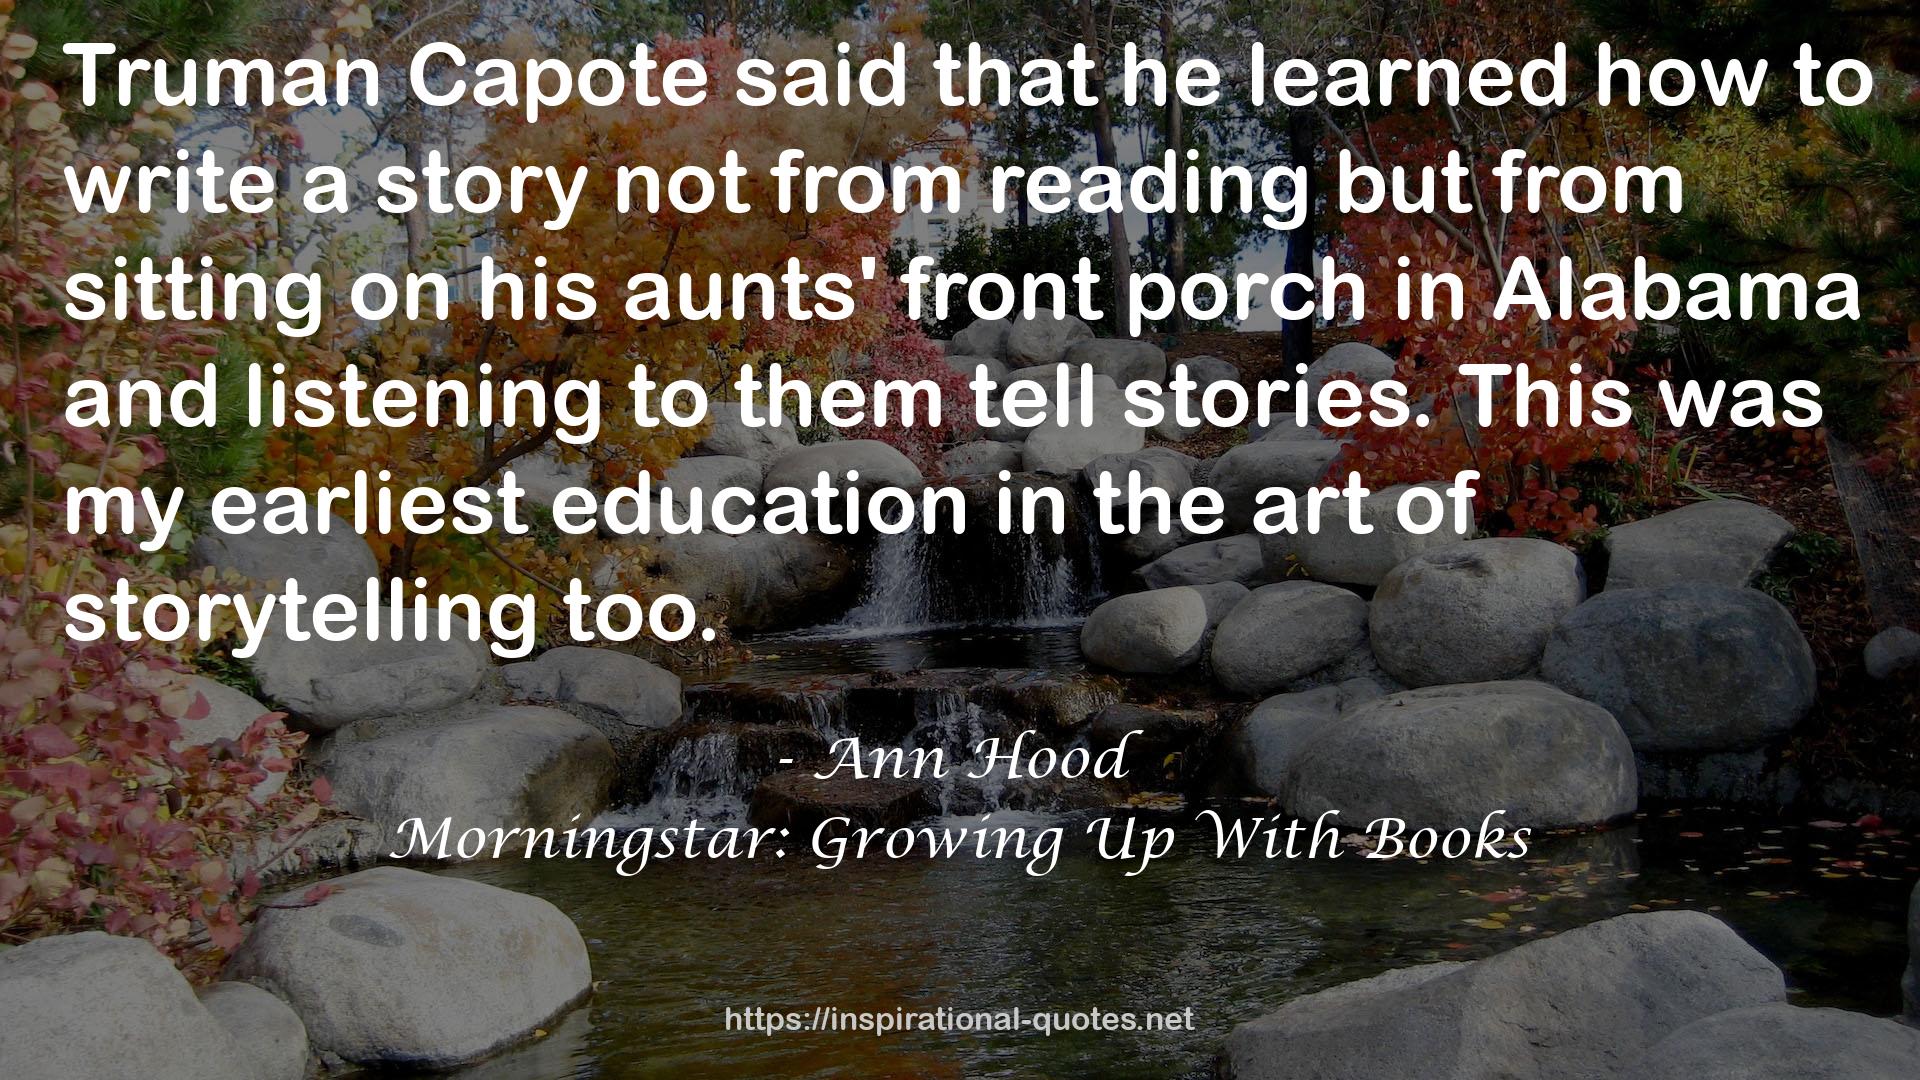 Morningstar: Growing Up With Books QUOTES